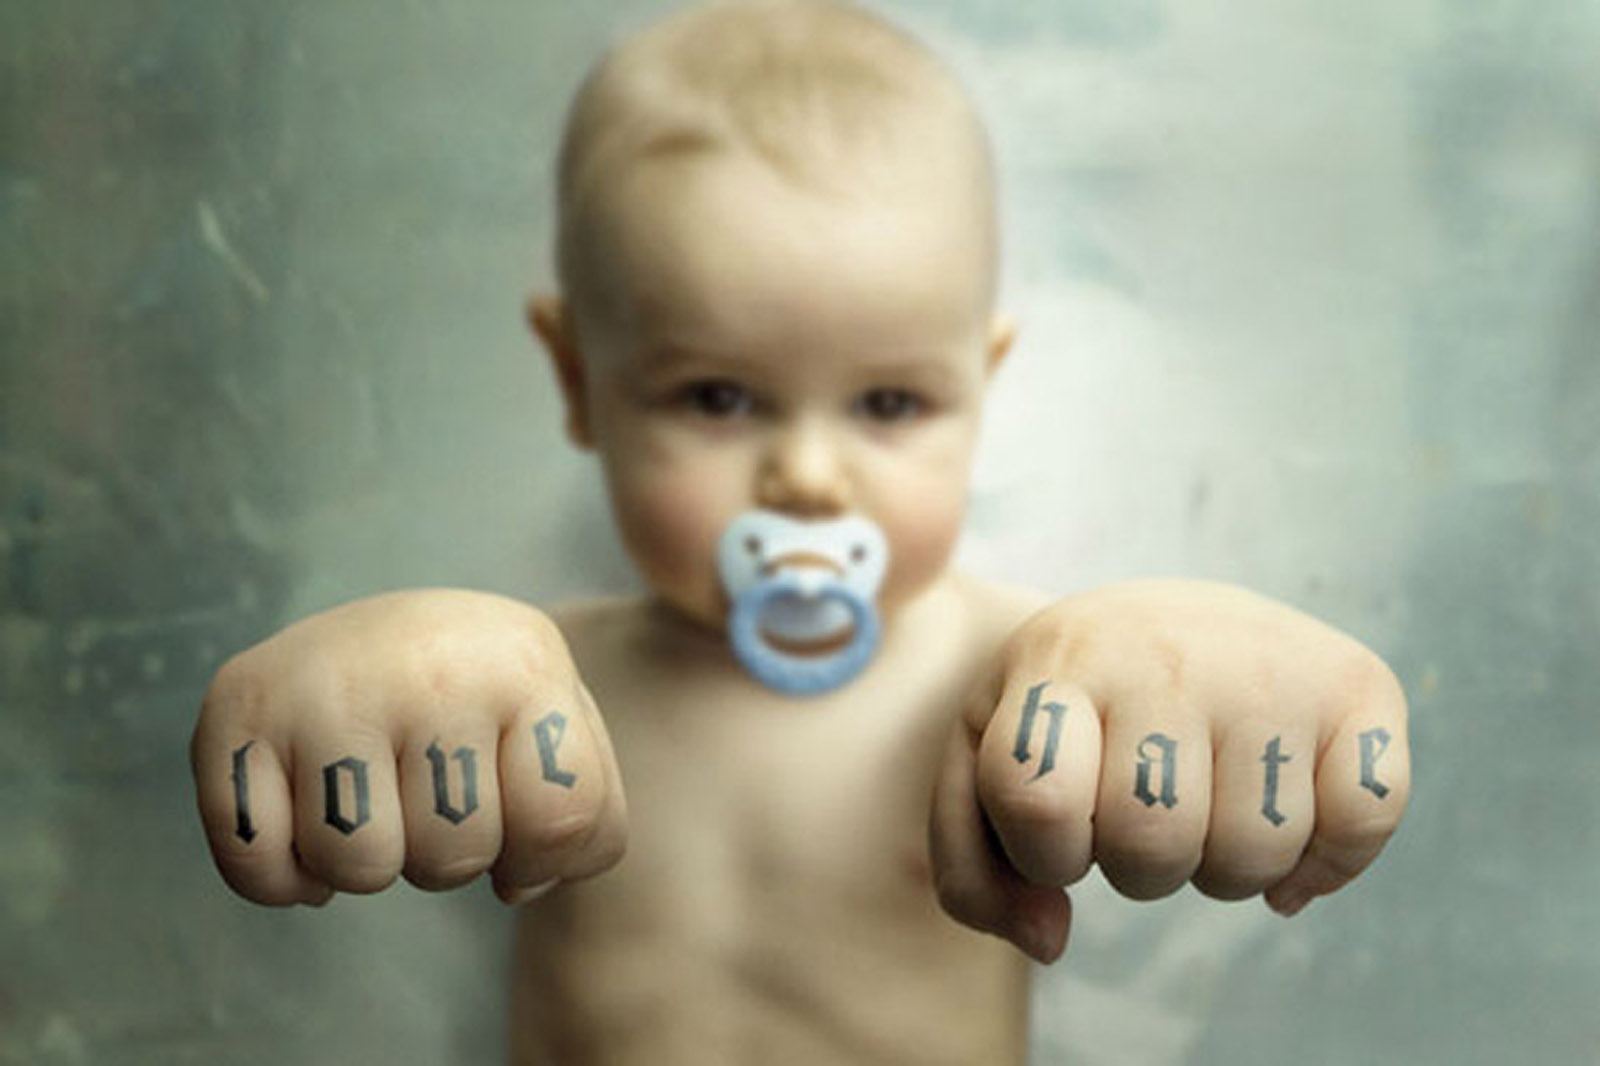 Facebook dp: Babies Funny Facebook pictures-dp, free download fb display  picture,image wallpapers,profile pic,mobile funny babies wallpaper of  2011,2012,2013,201